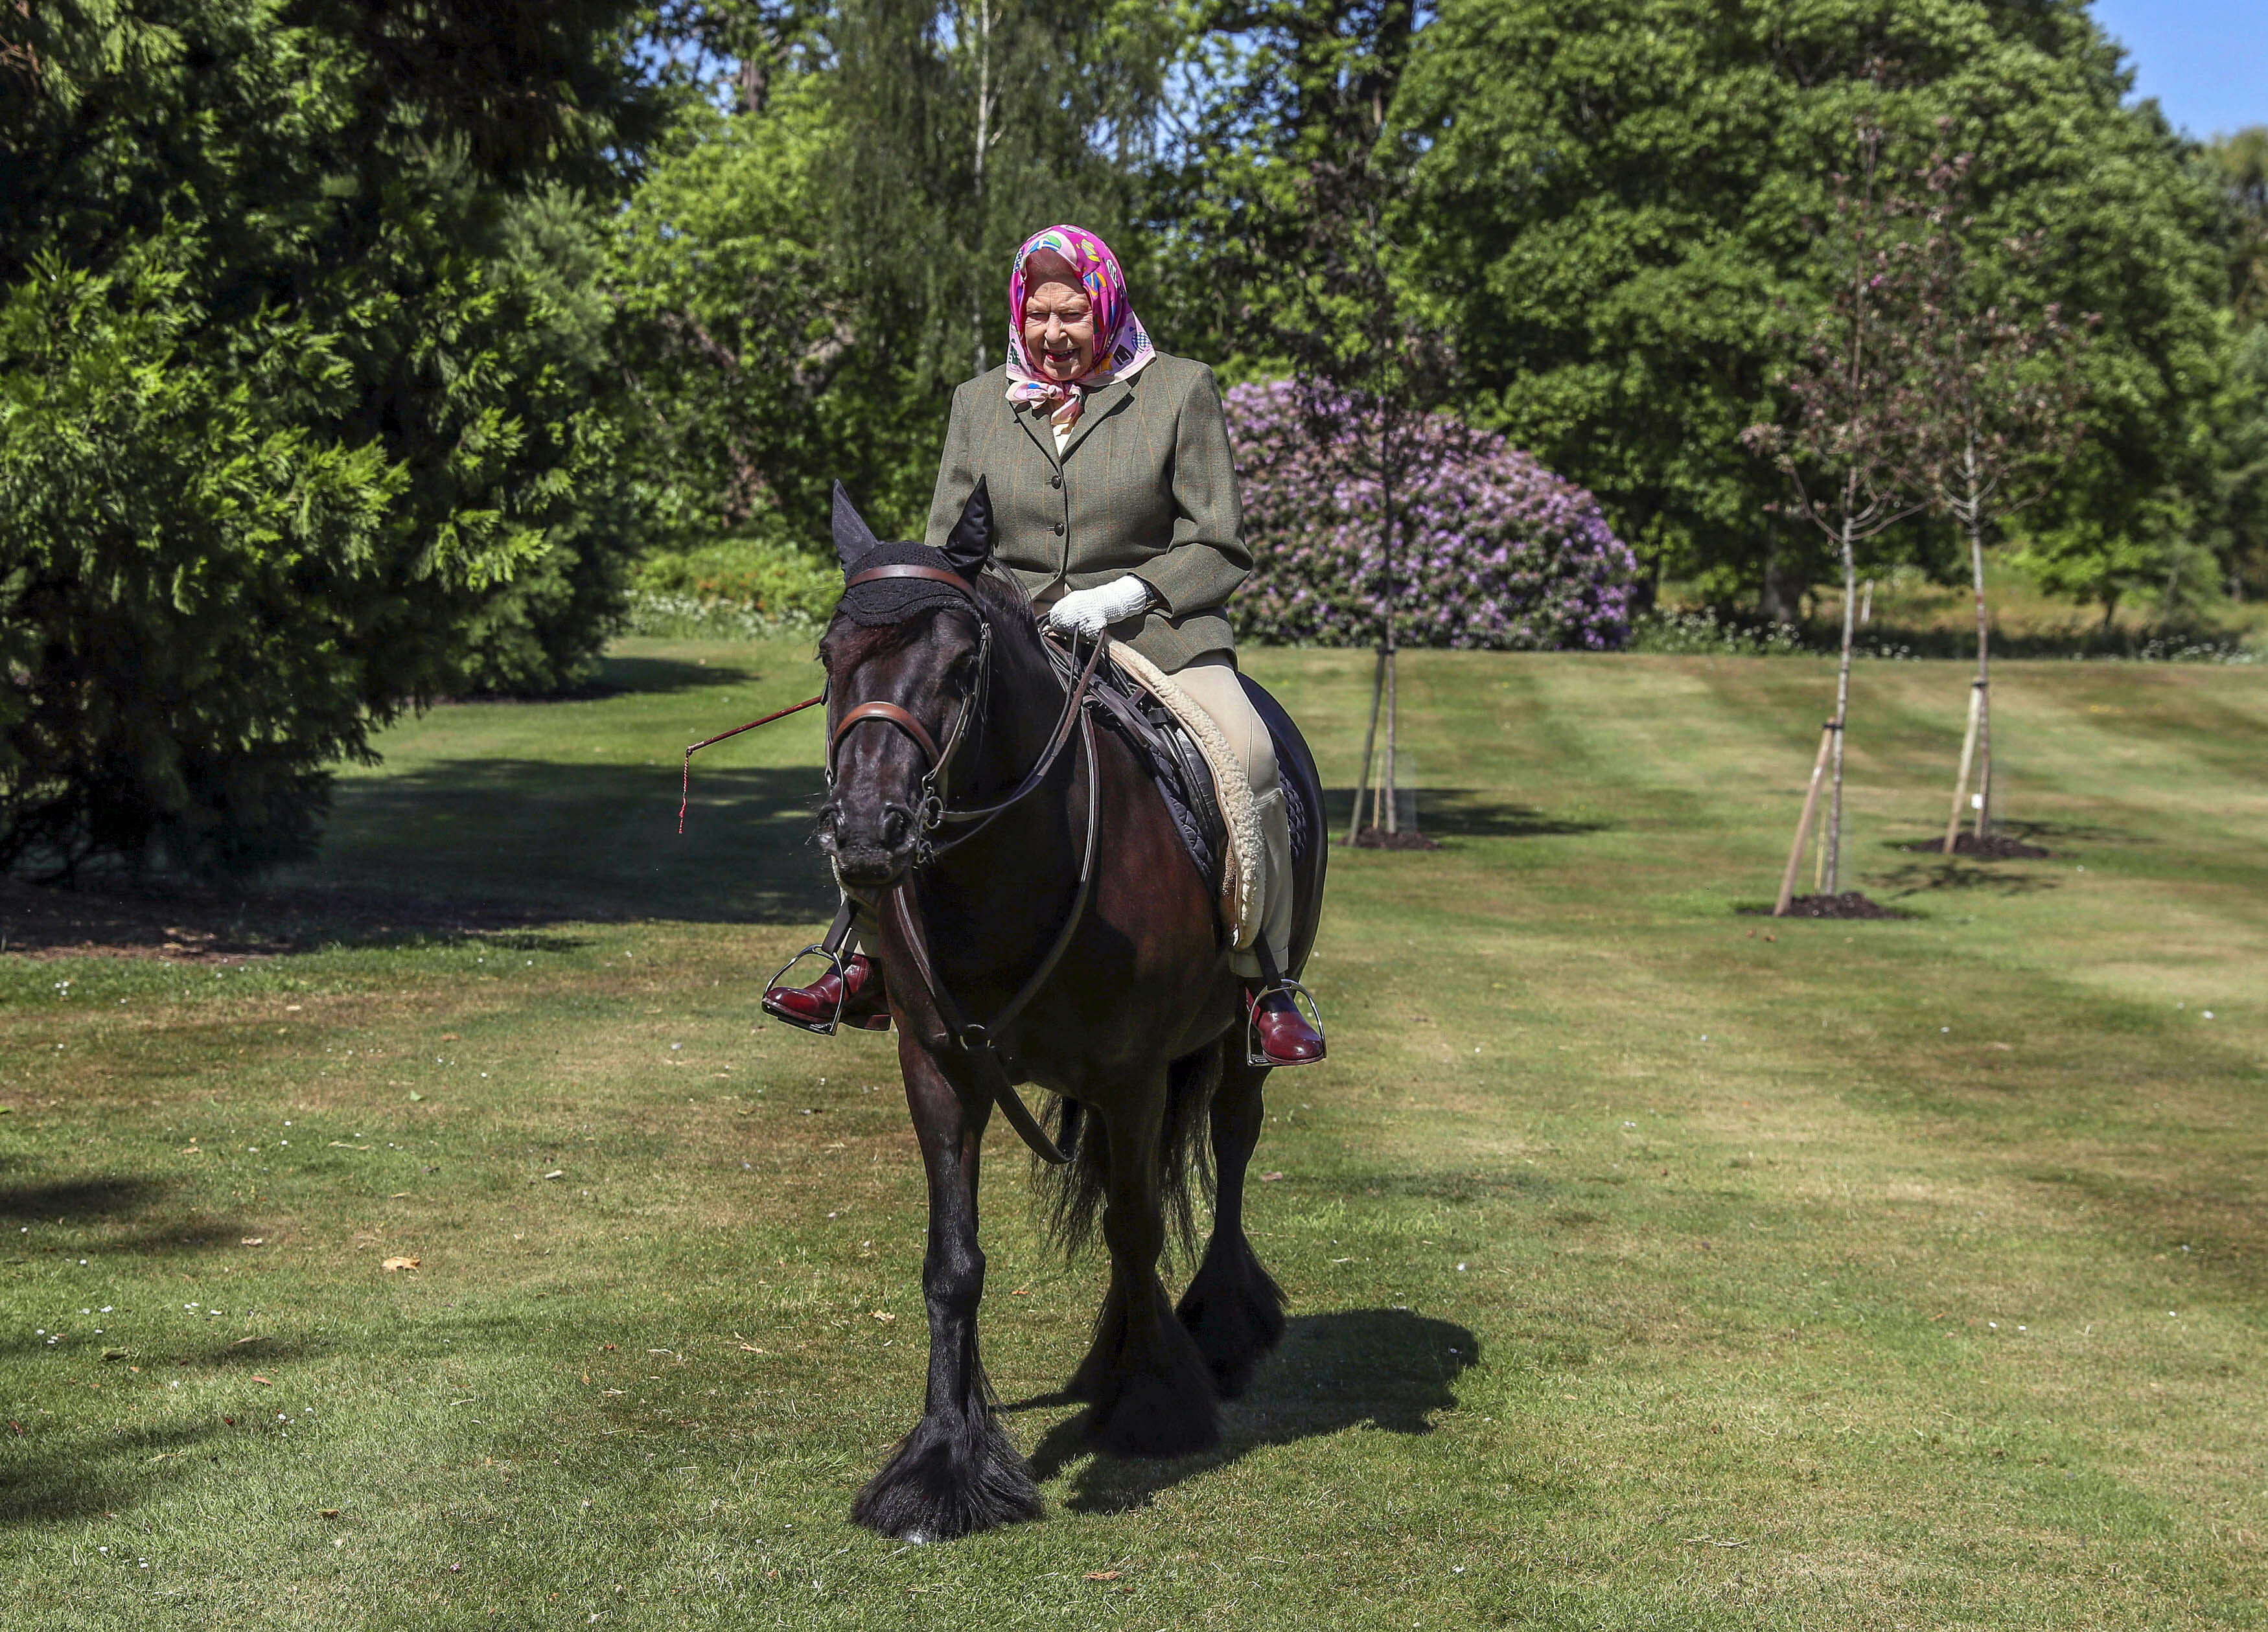 In this photo released Sunday May 31, 2020, Britain's Queen Elizabeth II rides Balmoral Fern, a 14-year-old Fell Pony, in Windsor Home Park over the weekend at the end of May, in Windsor, England. The Queen has been in residence at Windsor Castle during the COVID-19 AP/PTI Photo